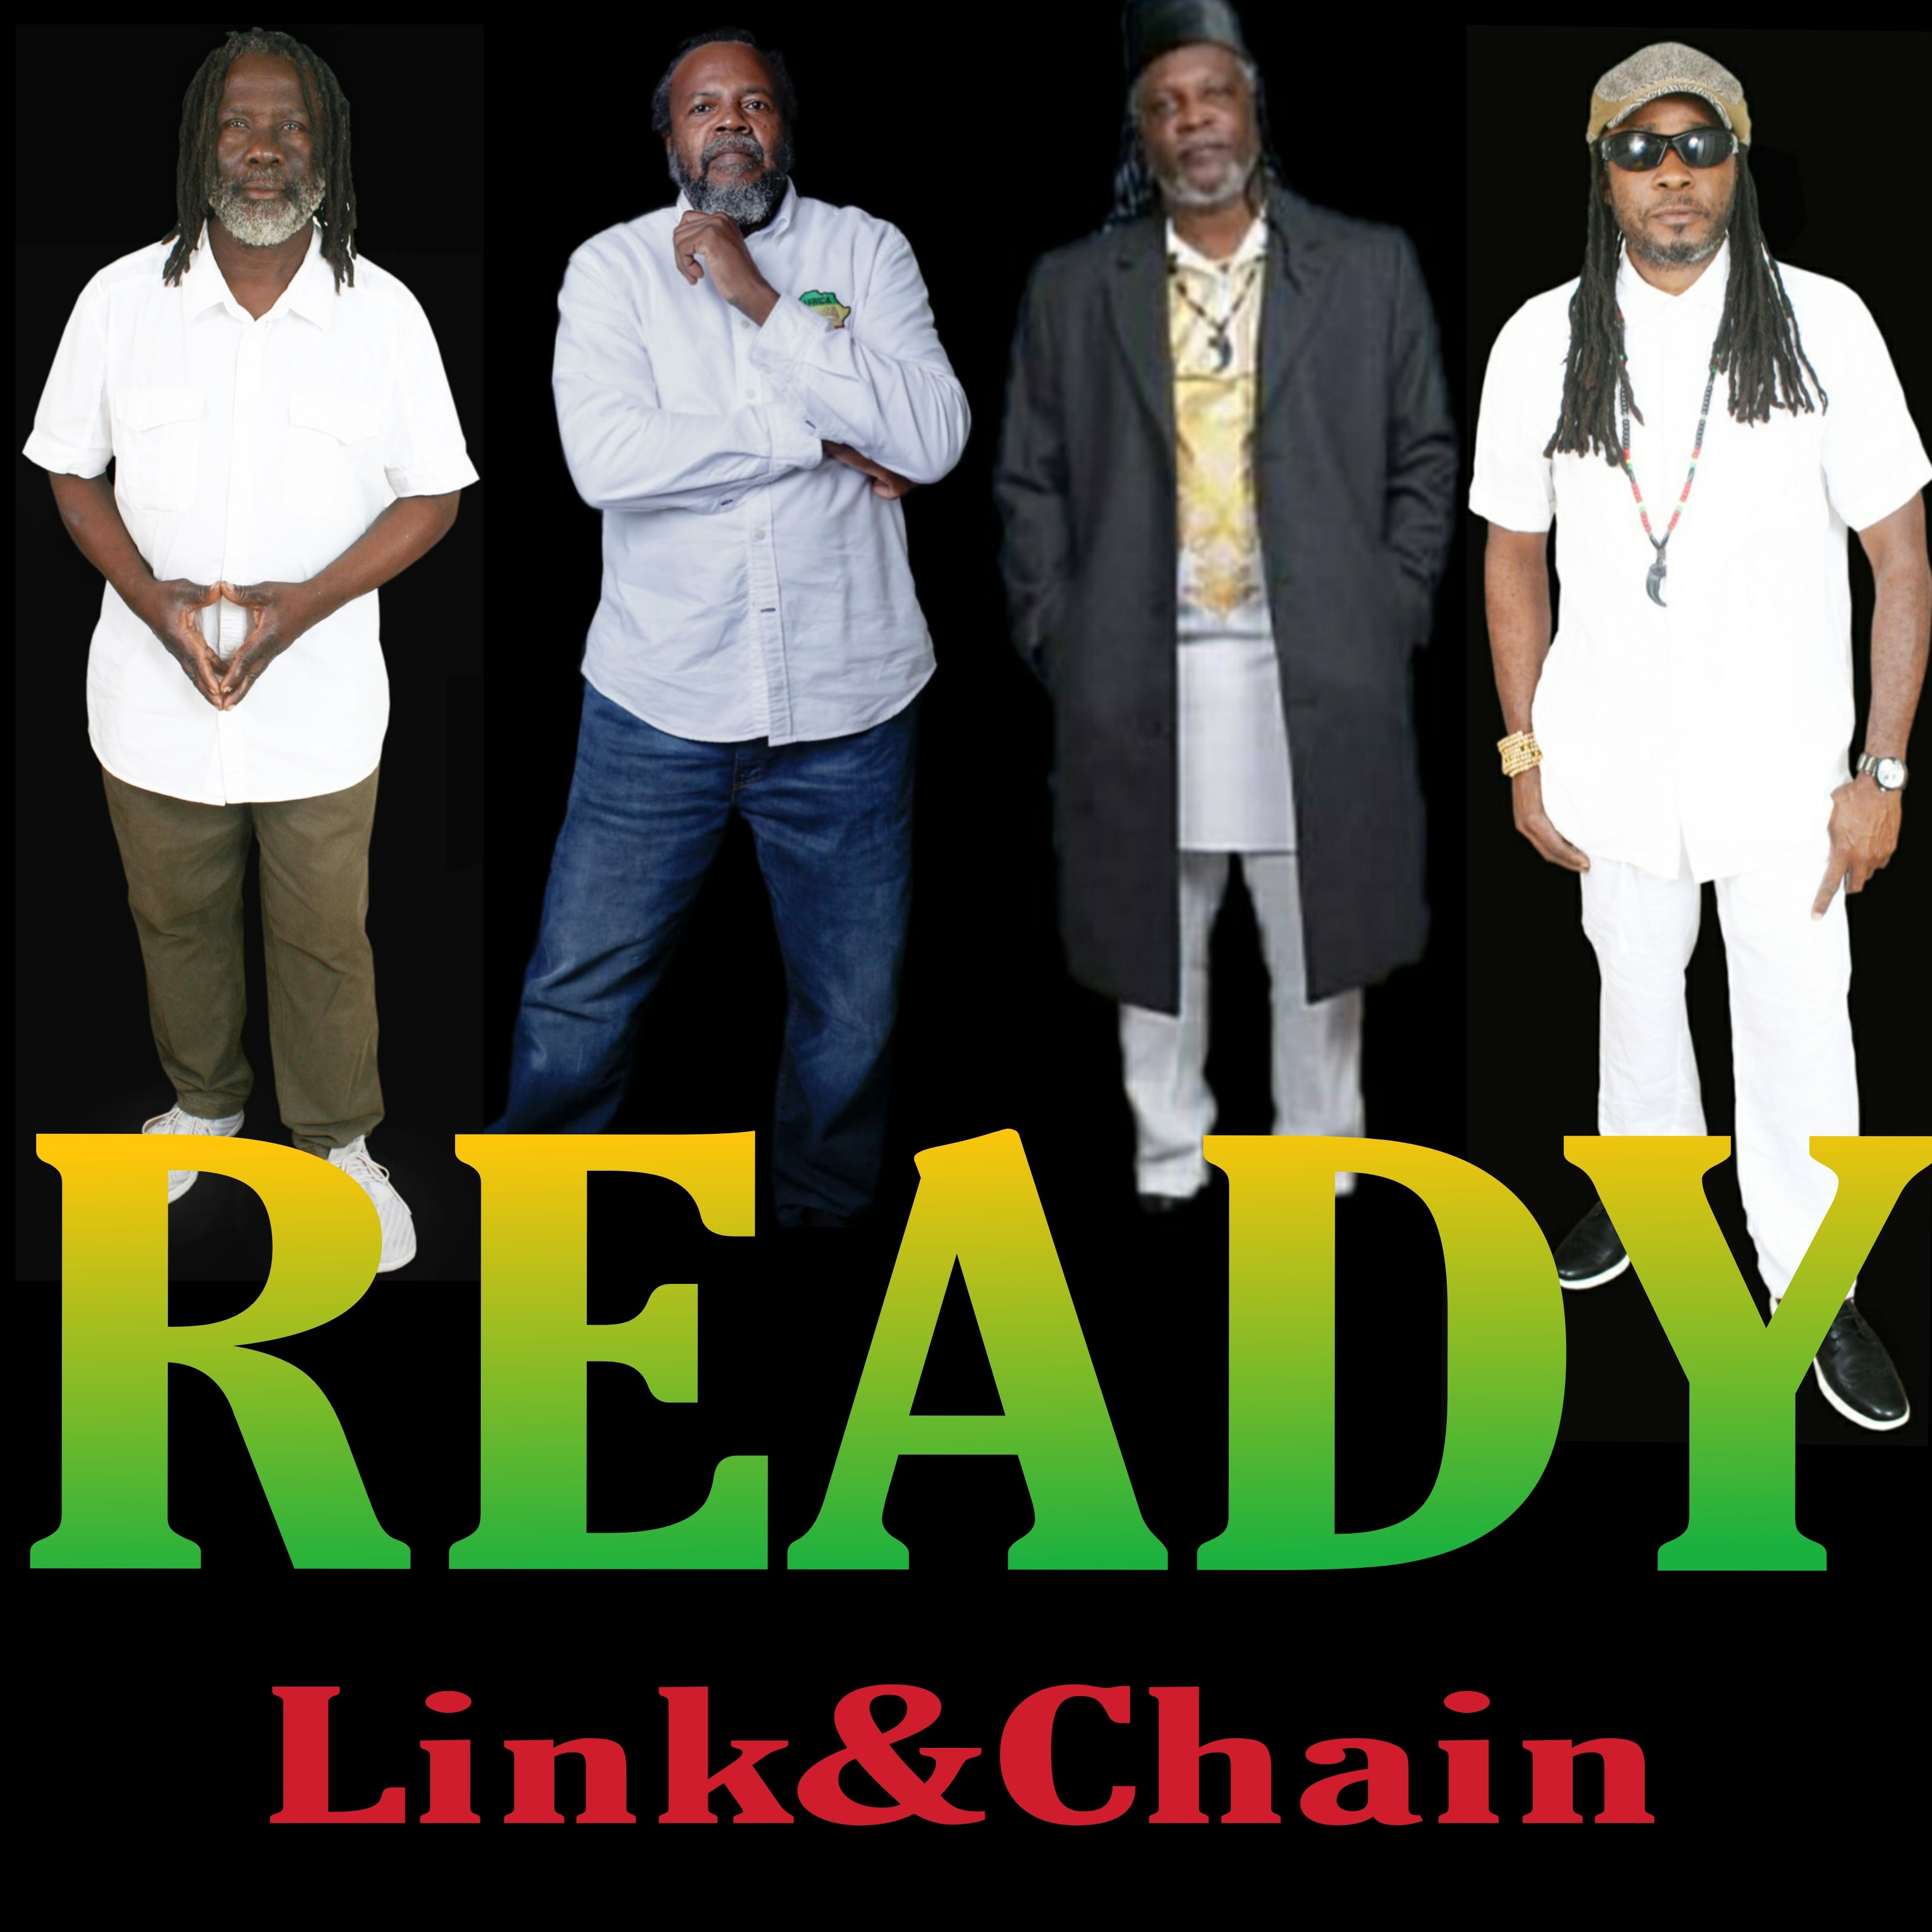 Link&Chain prove they are ready with new single…